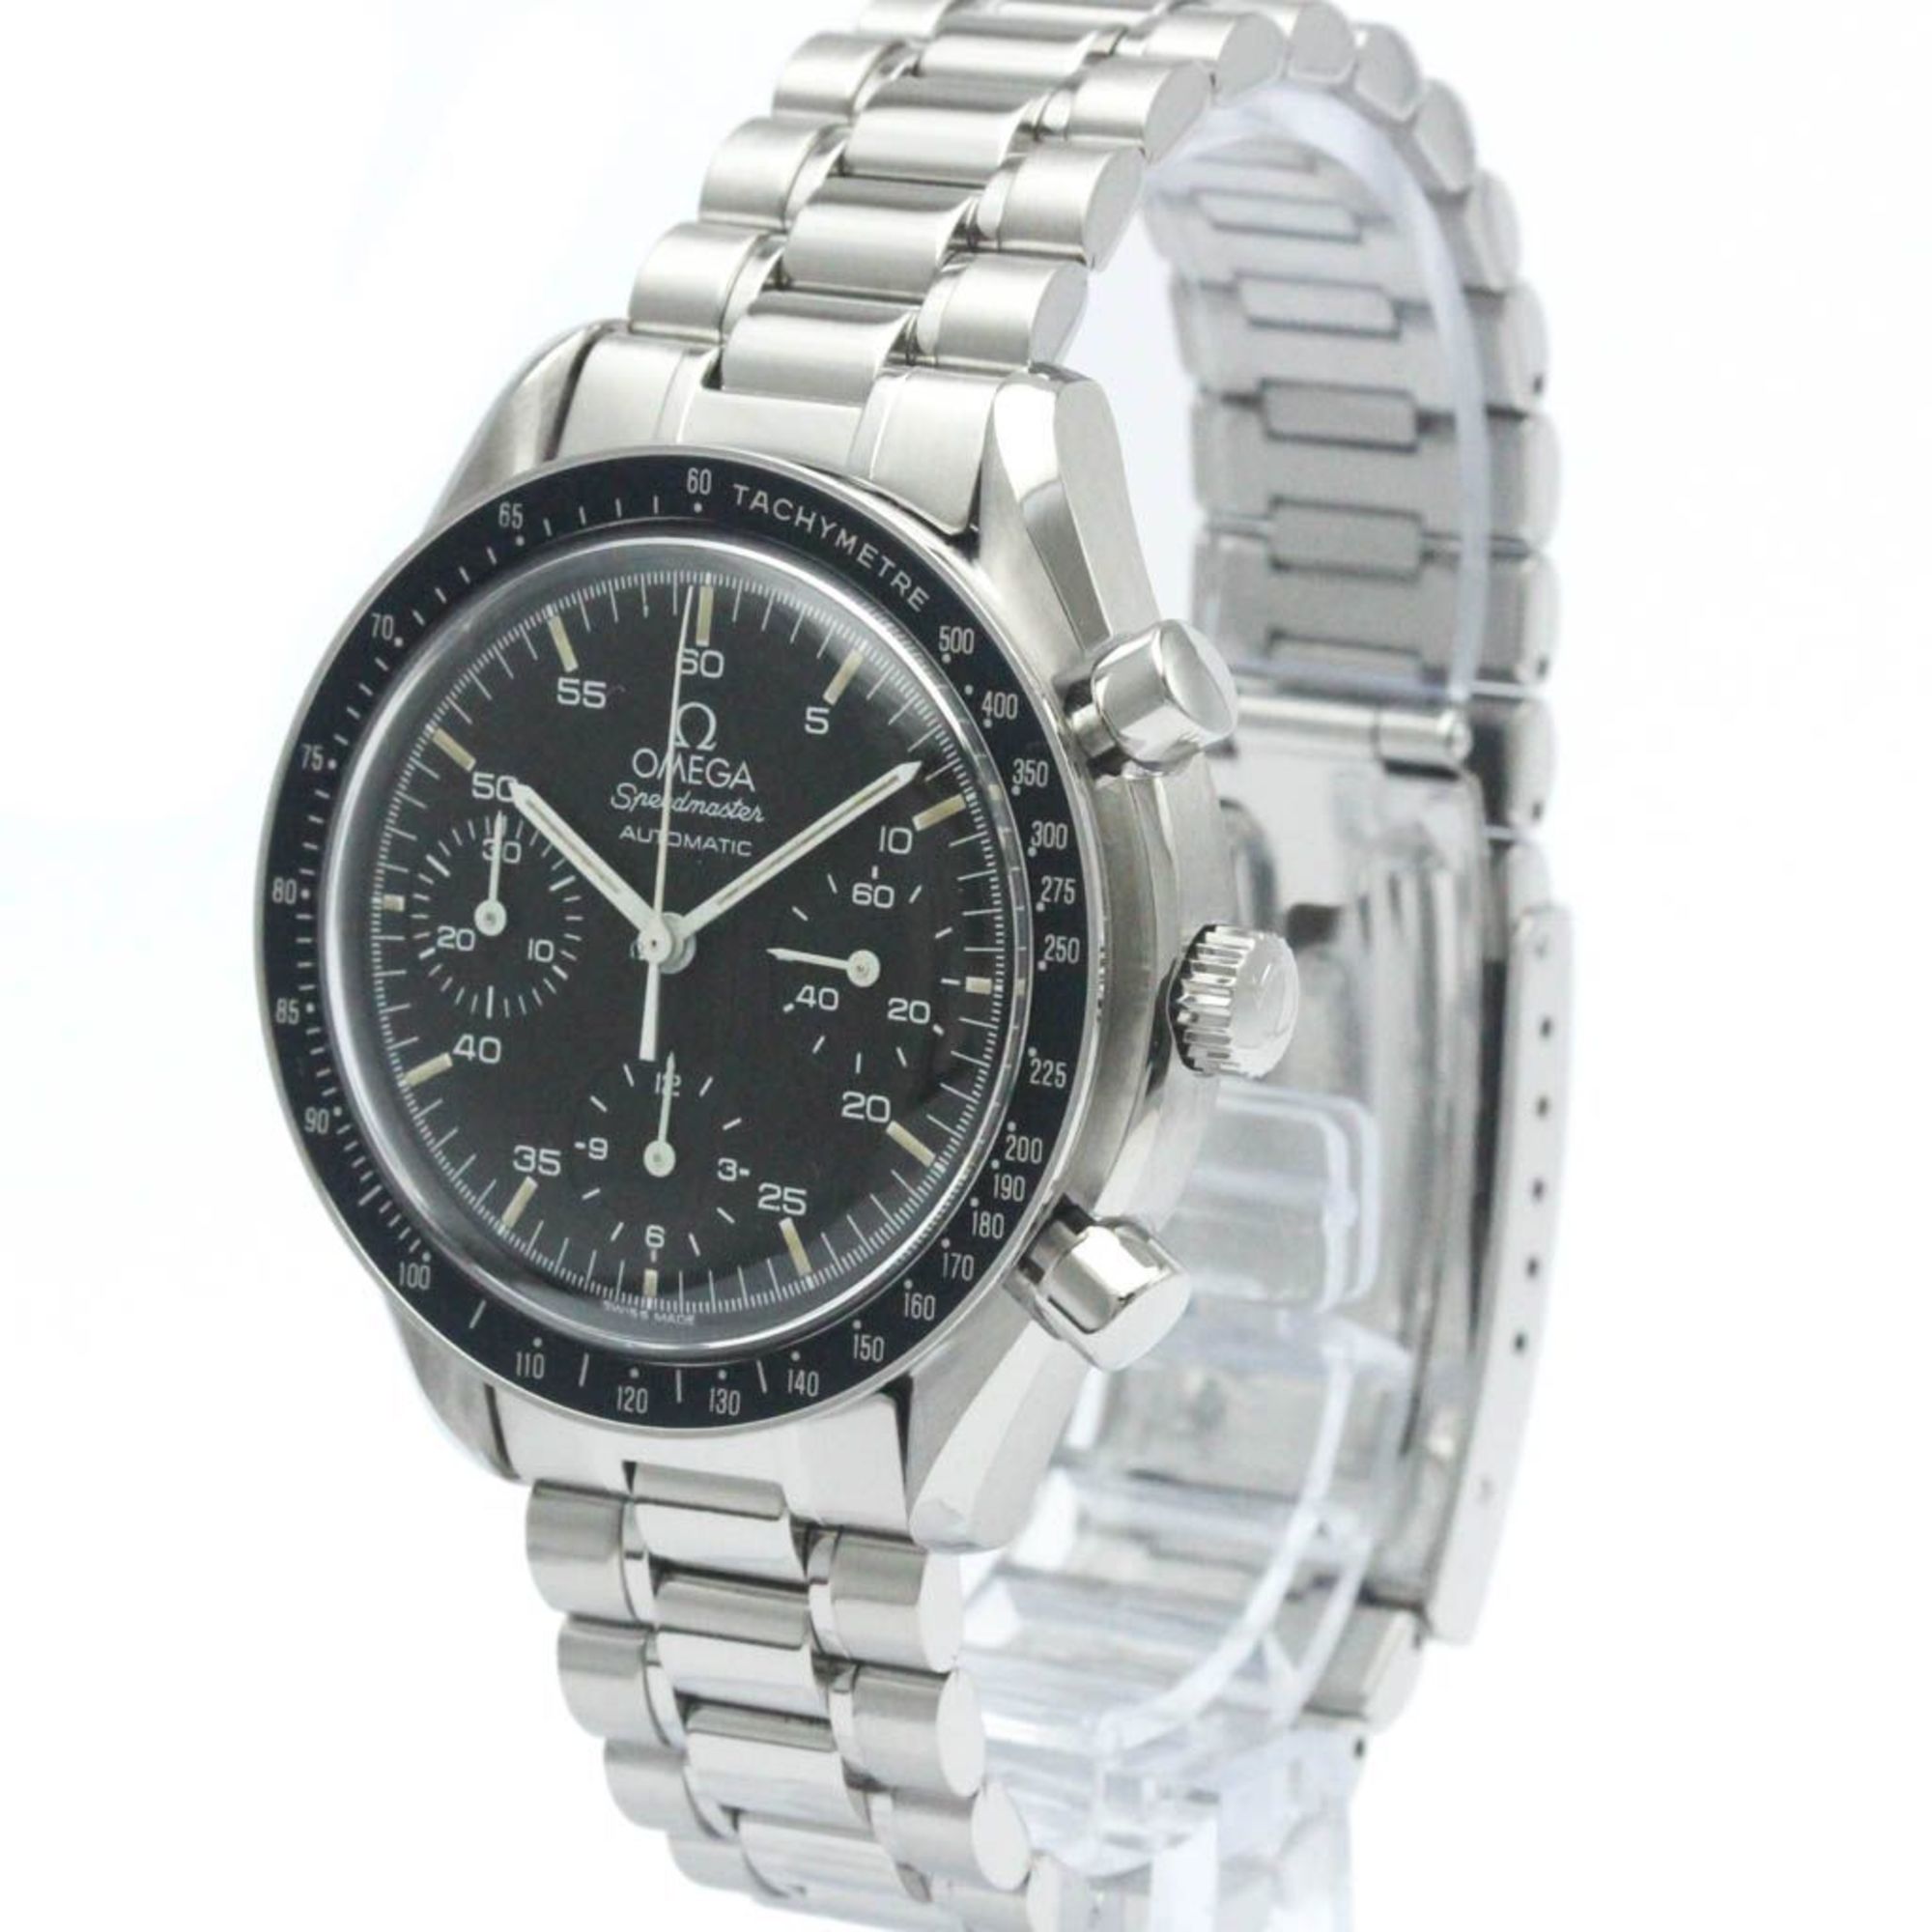 Polished OMEGA Speedmaster Automatic Steel Mens Watch 3510.50 BF567911